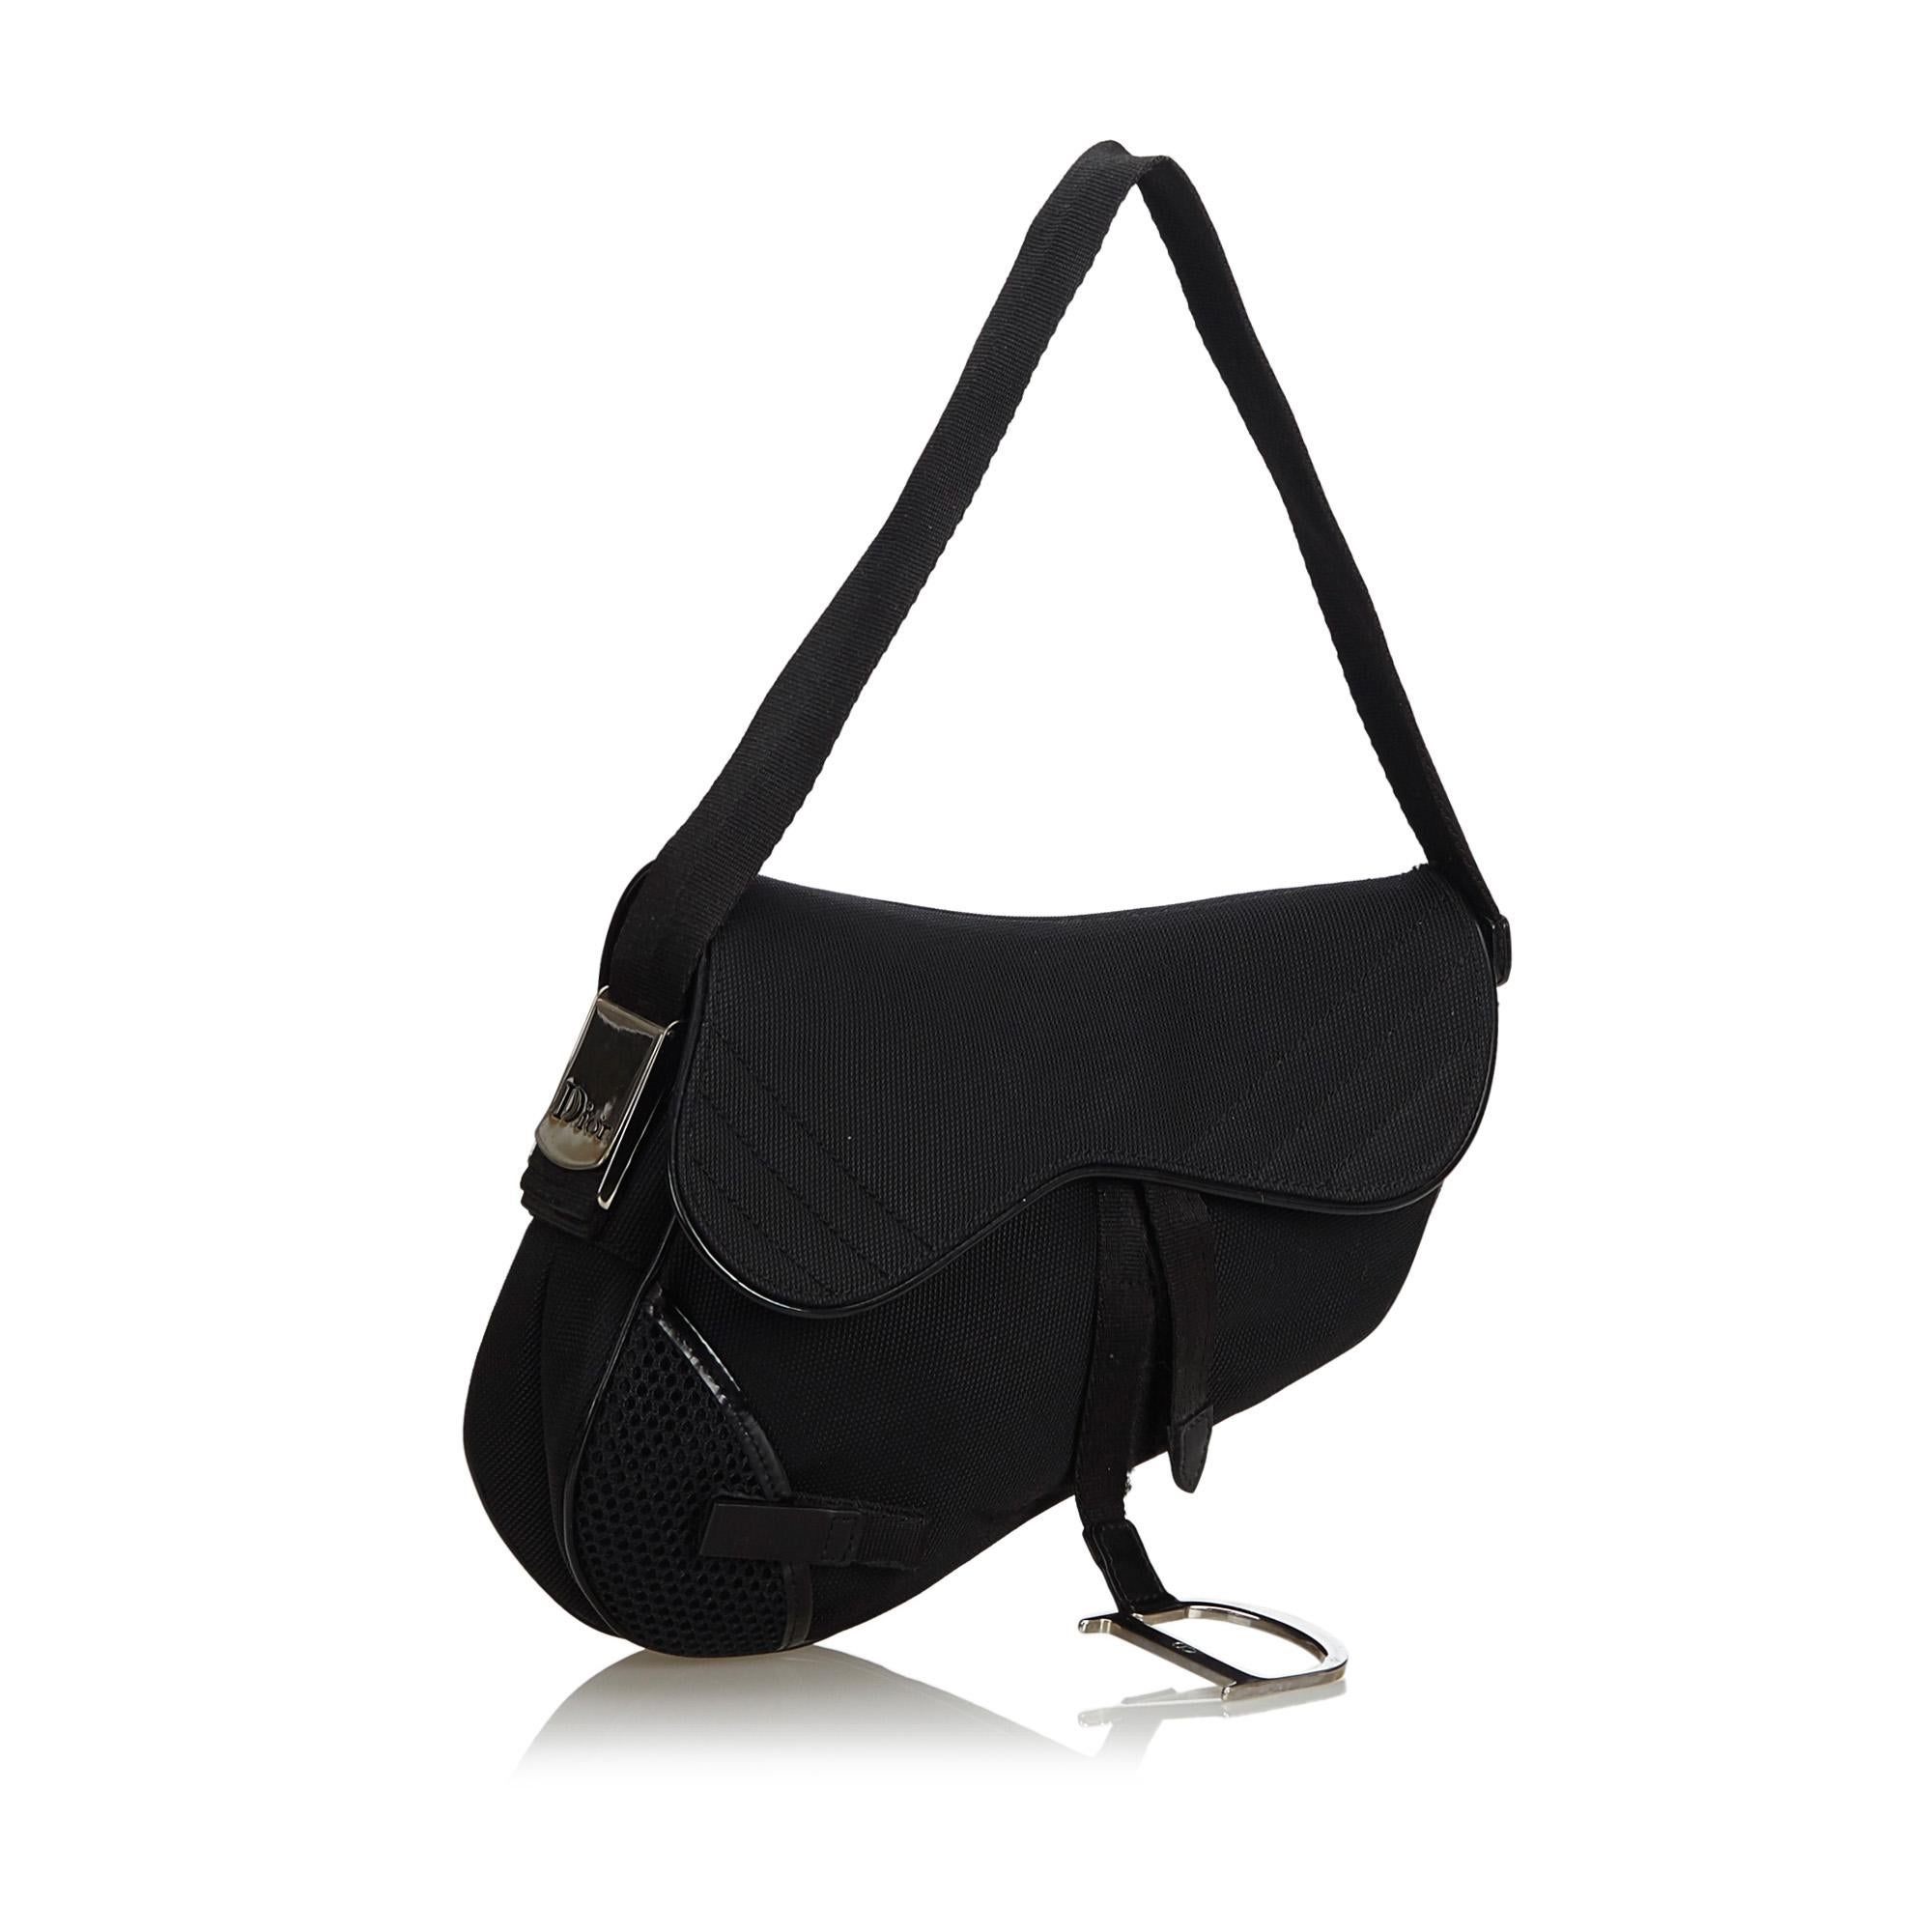 The Saddle features a nylon body, a back exterior mesh slip pocket, a flat strap, a top flap, and an interior zip pocket. It carries as B+ condition rating.

Inclusions: 
Dust Bag

Dimensions:
Length: 19.00 cm
Width: 26.00 cm
Depth: 5.50 cm
Shoulder